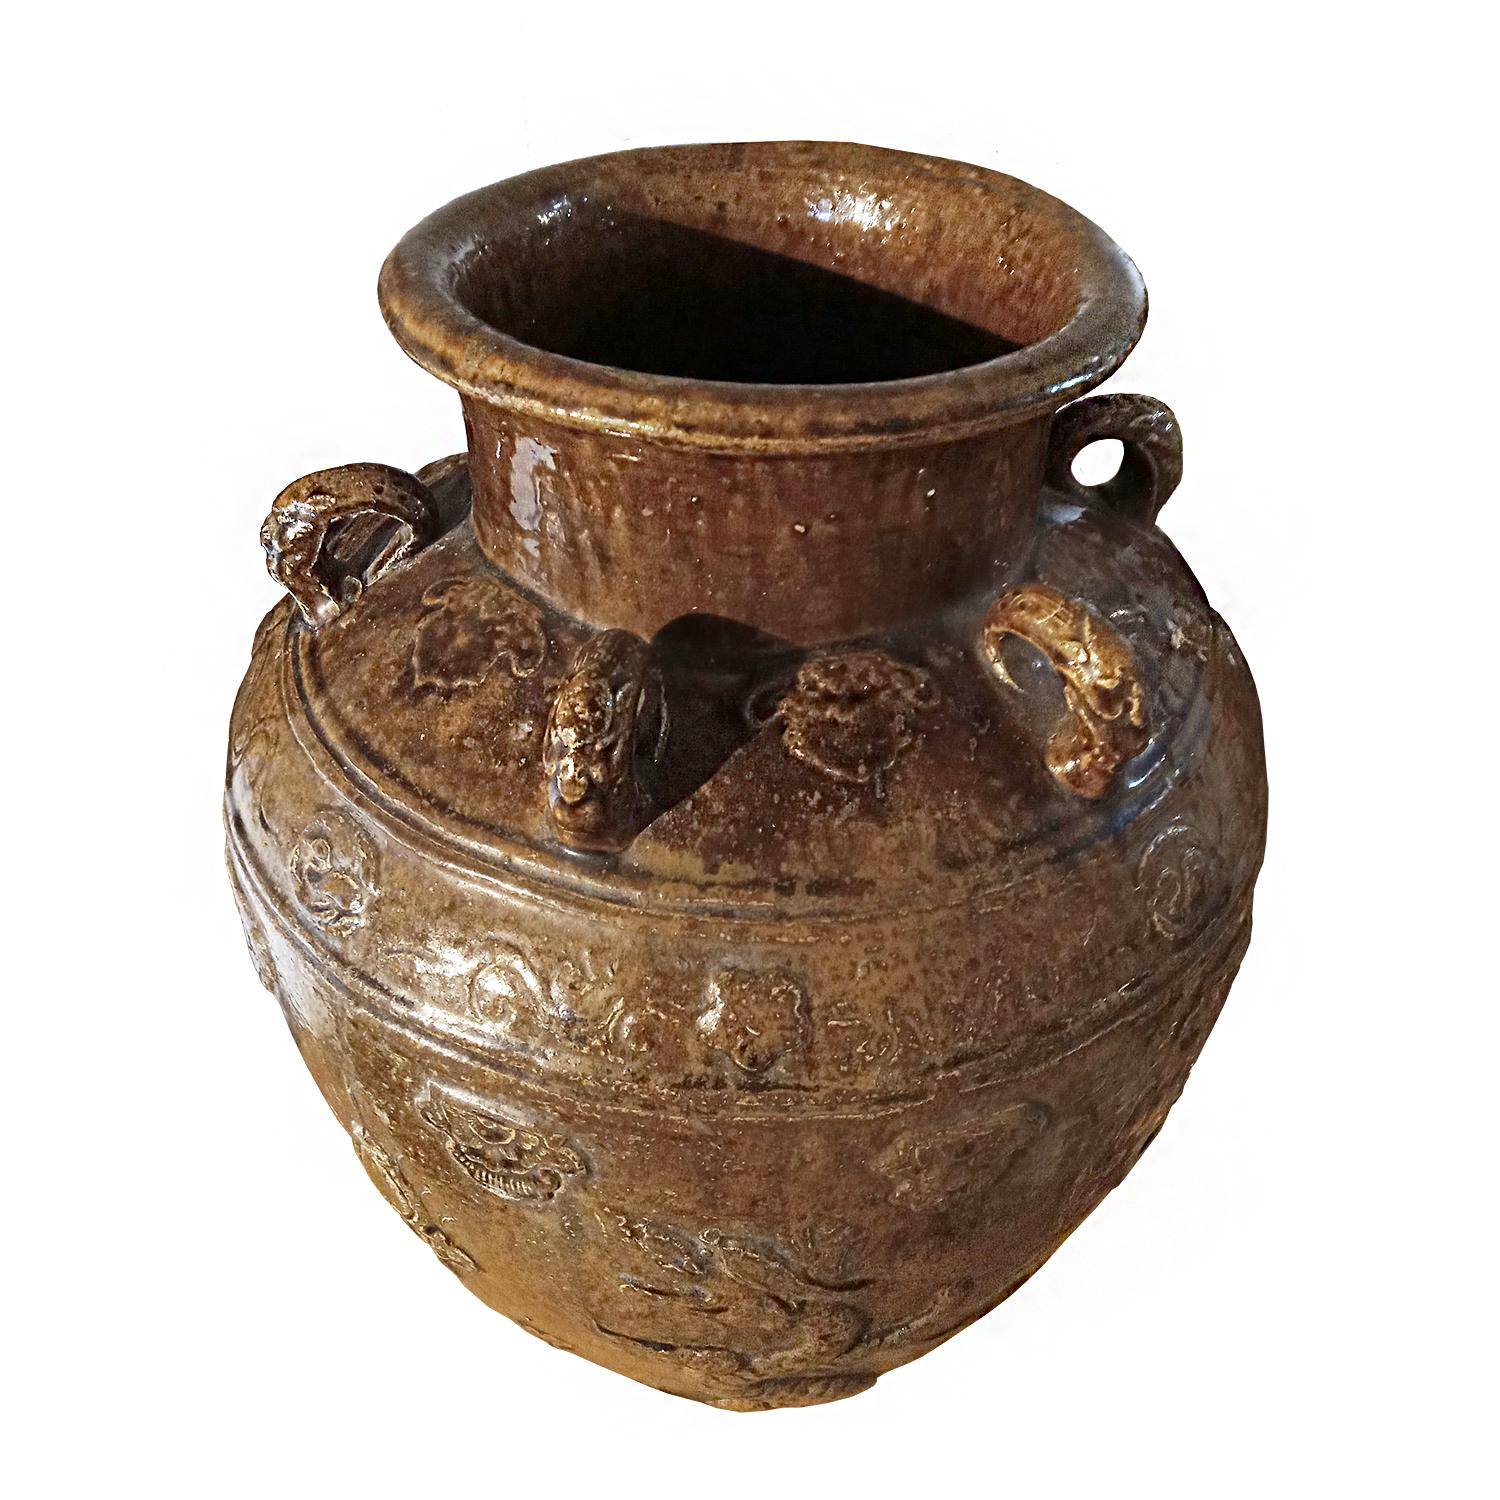 Indonesian Terracotta Urn / Jar / Vase with Brown Glaze and Dragon Motif For Sale 5